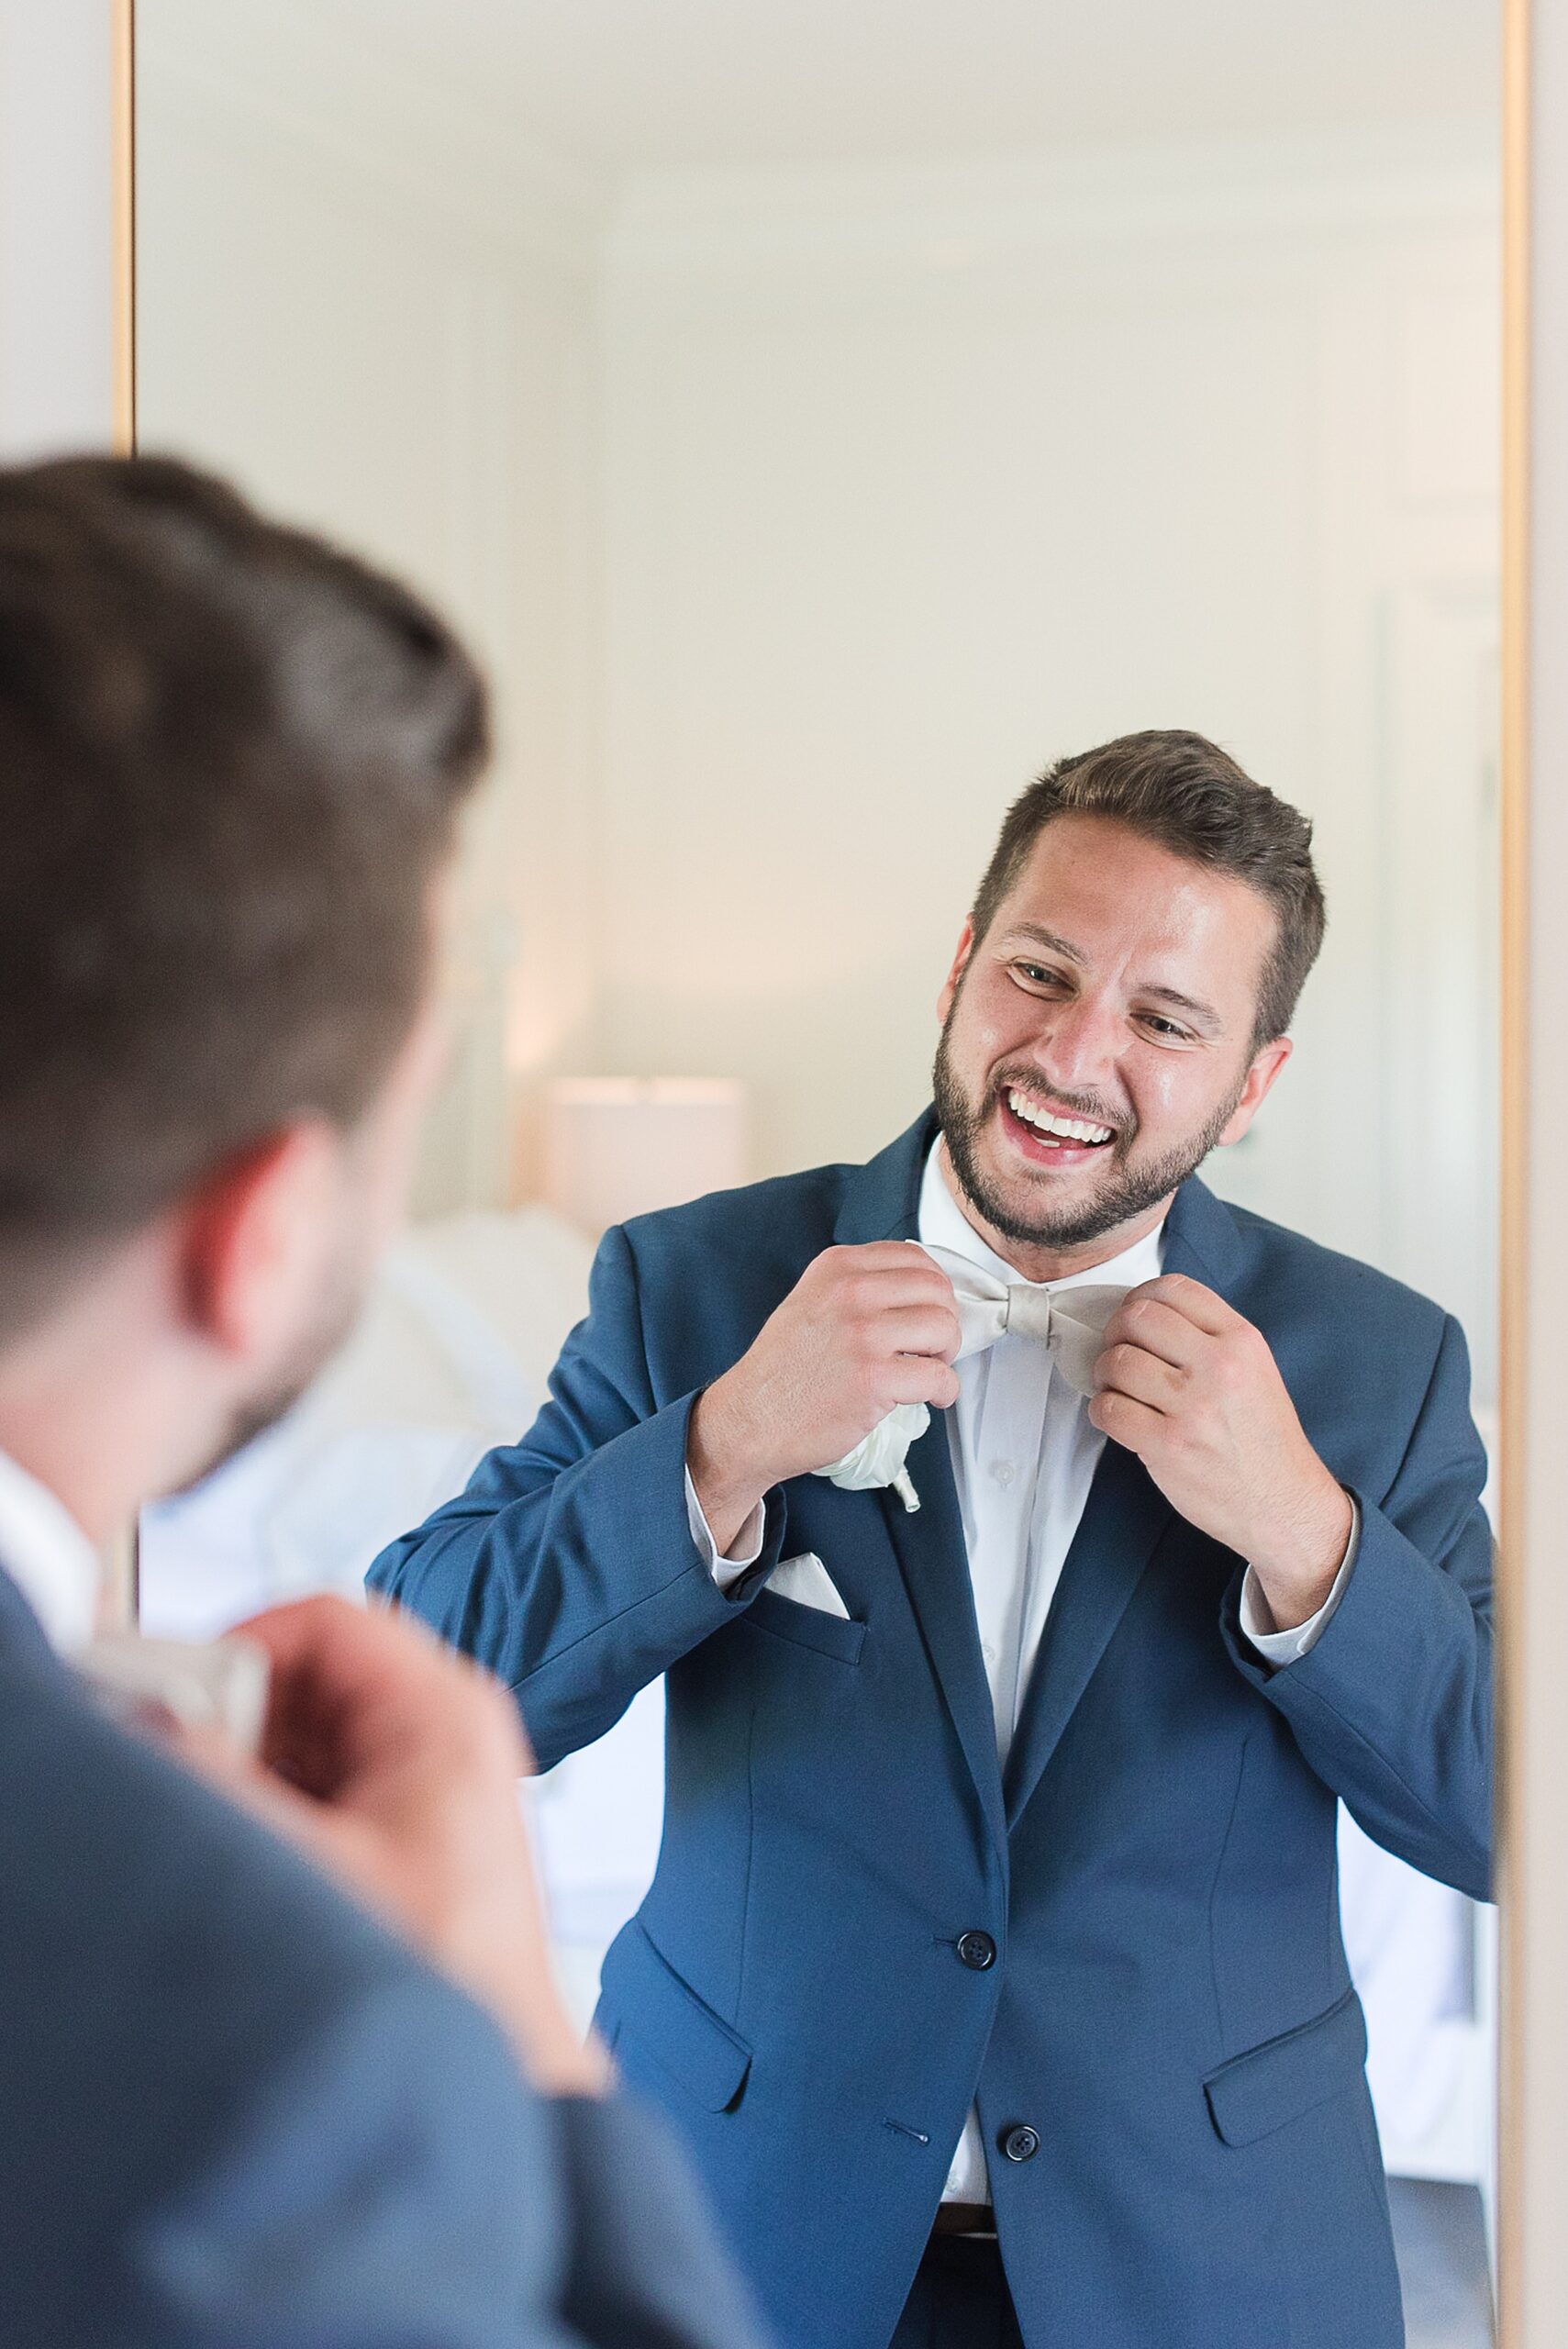 A groom laughs while adjusting his white bowtie in a mirror